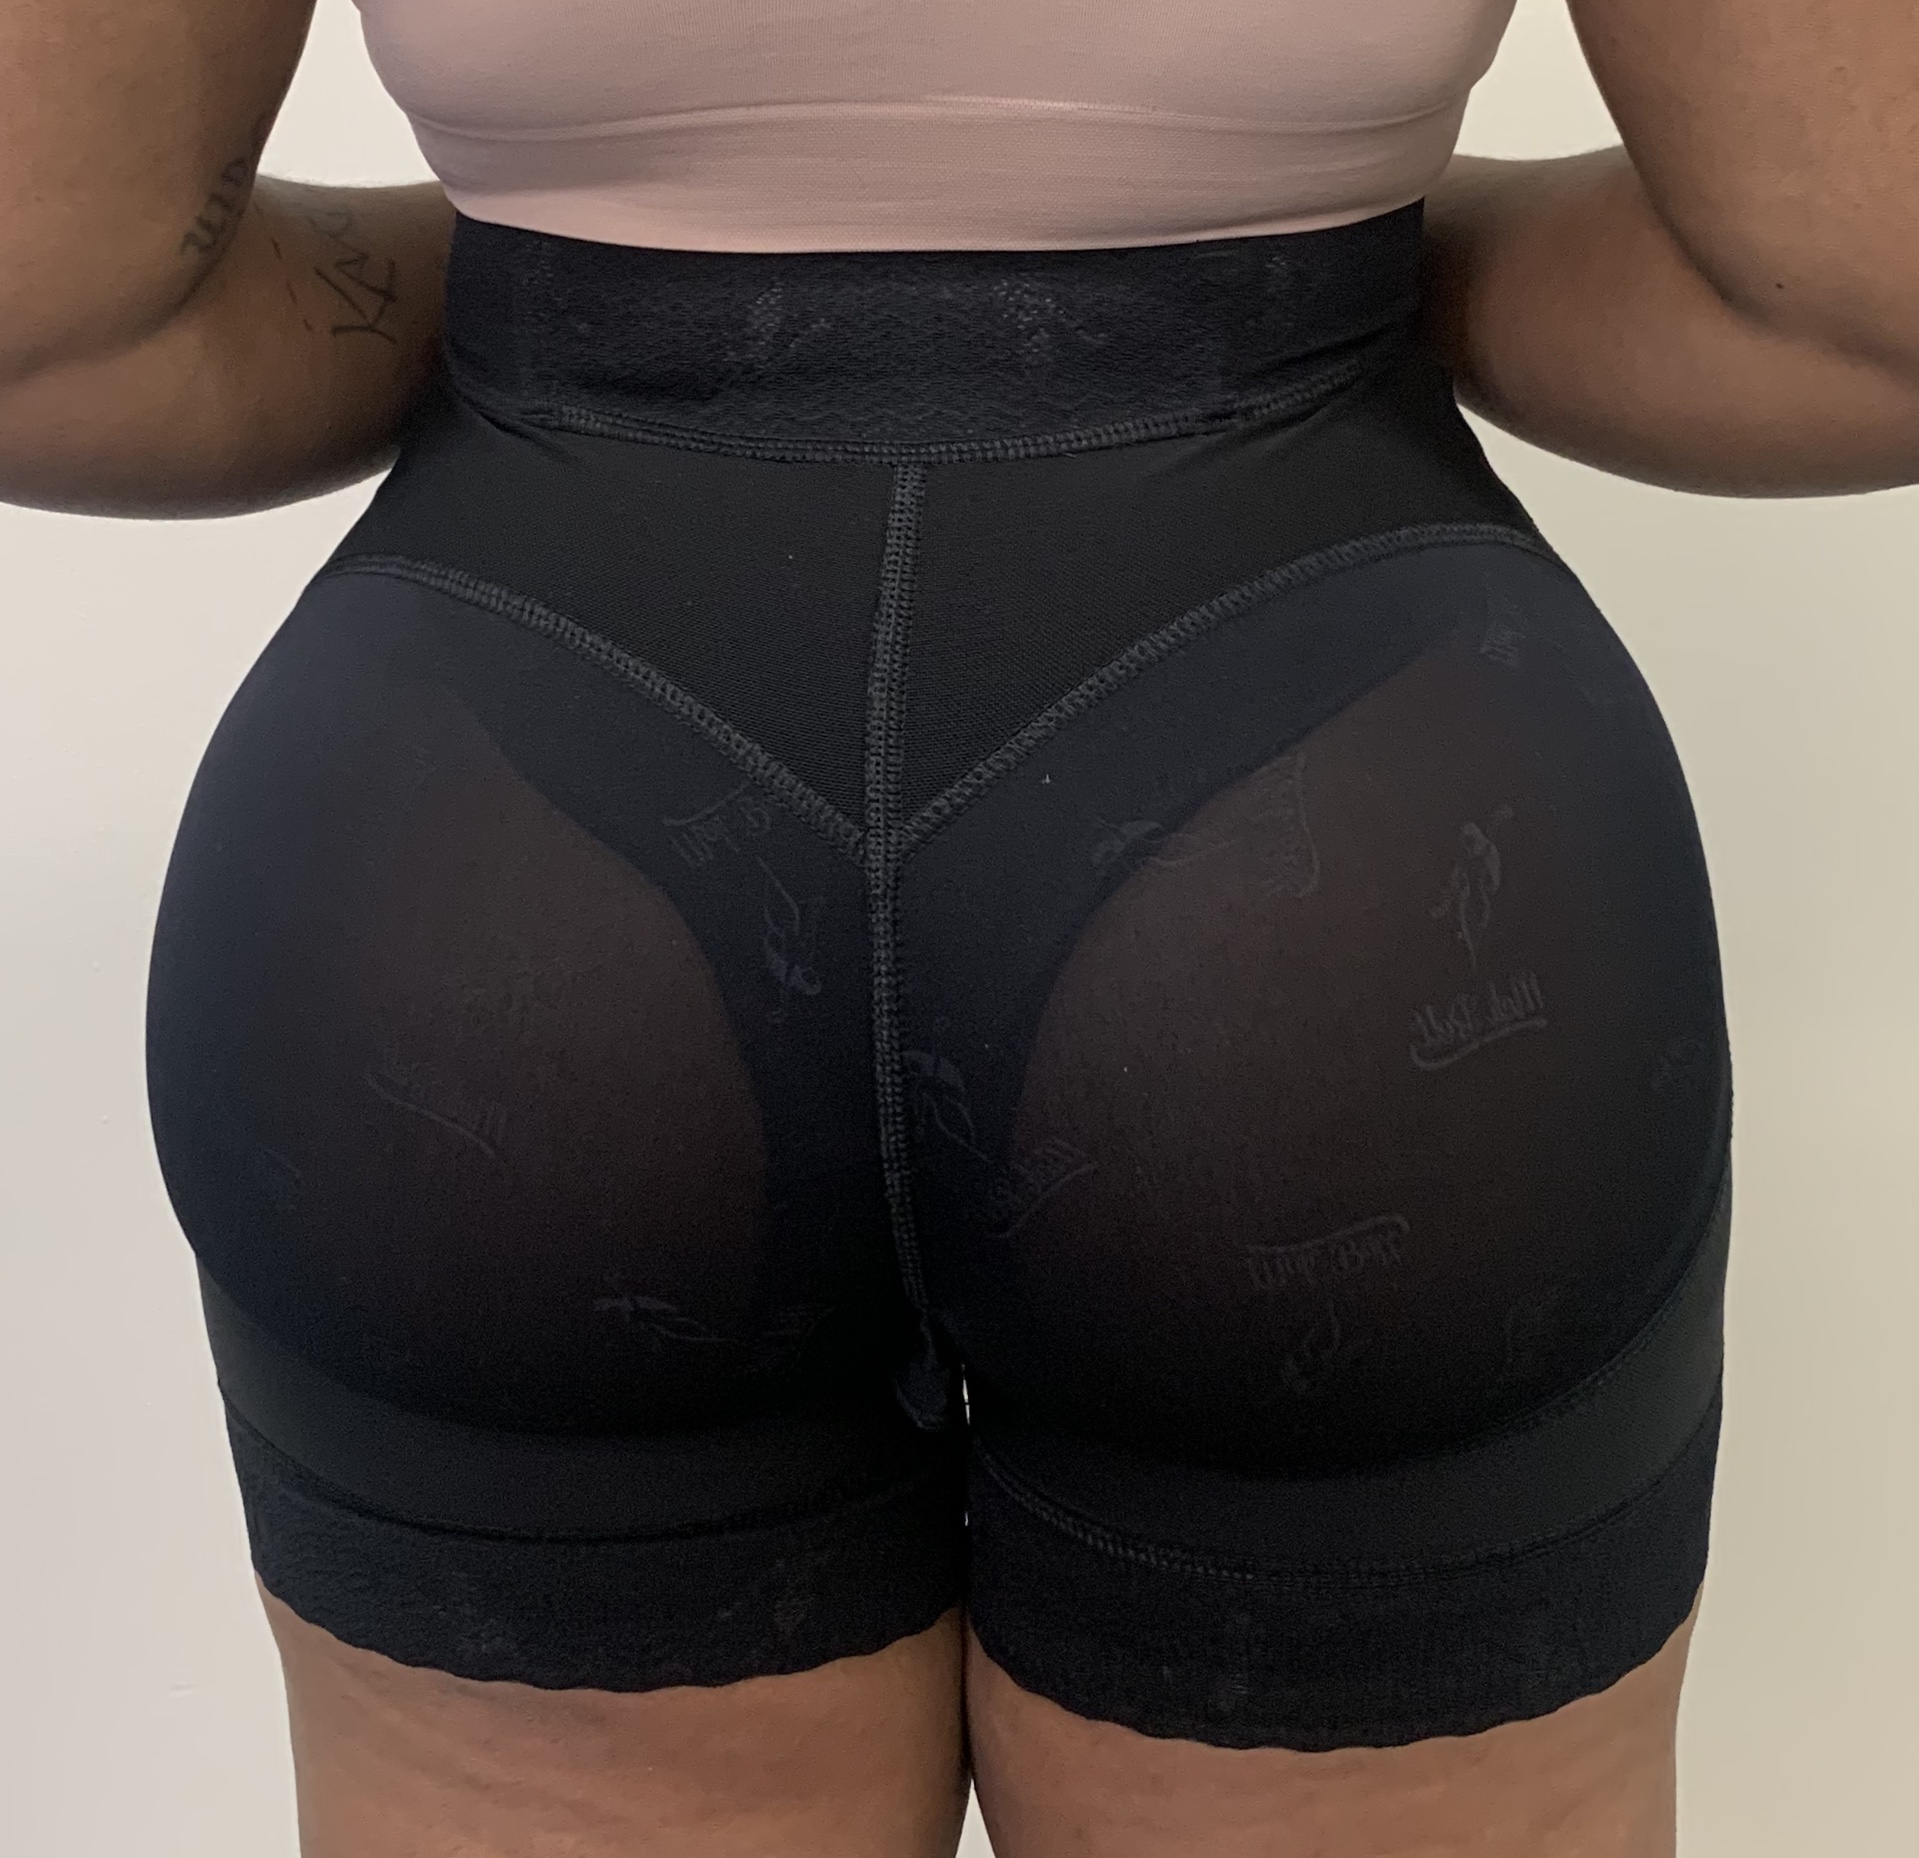 Snatched 'Waist Wrap' – BeautyByBiola